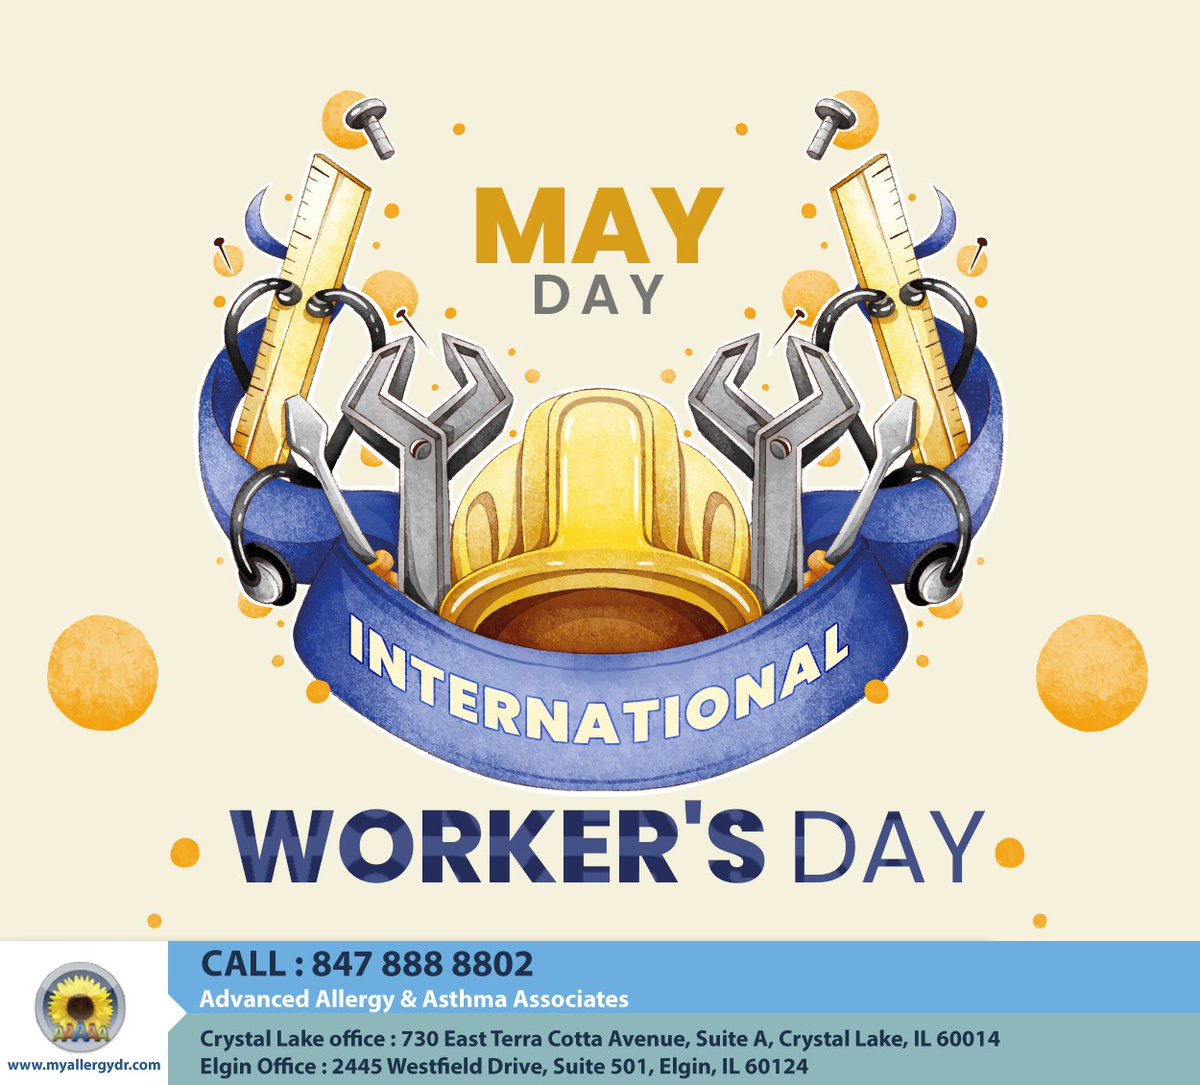 Today is a celebration of life as we know it. We would not be able to prosper without the contributions and hard work of workers from all walks of life. Sending good wishes your way this May Day. #mayday #crystallake #IL #myallergydr